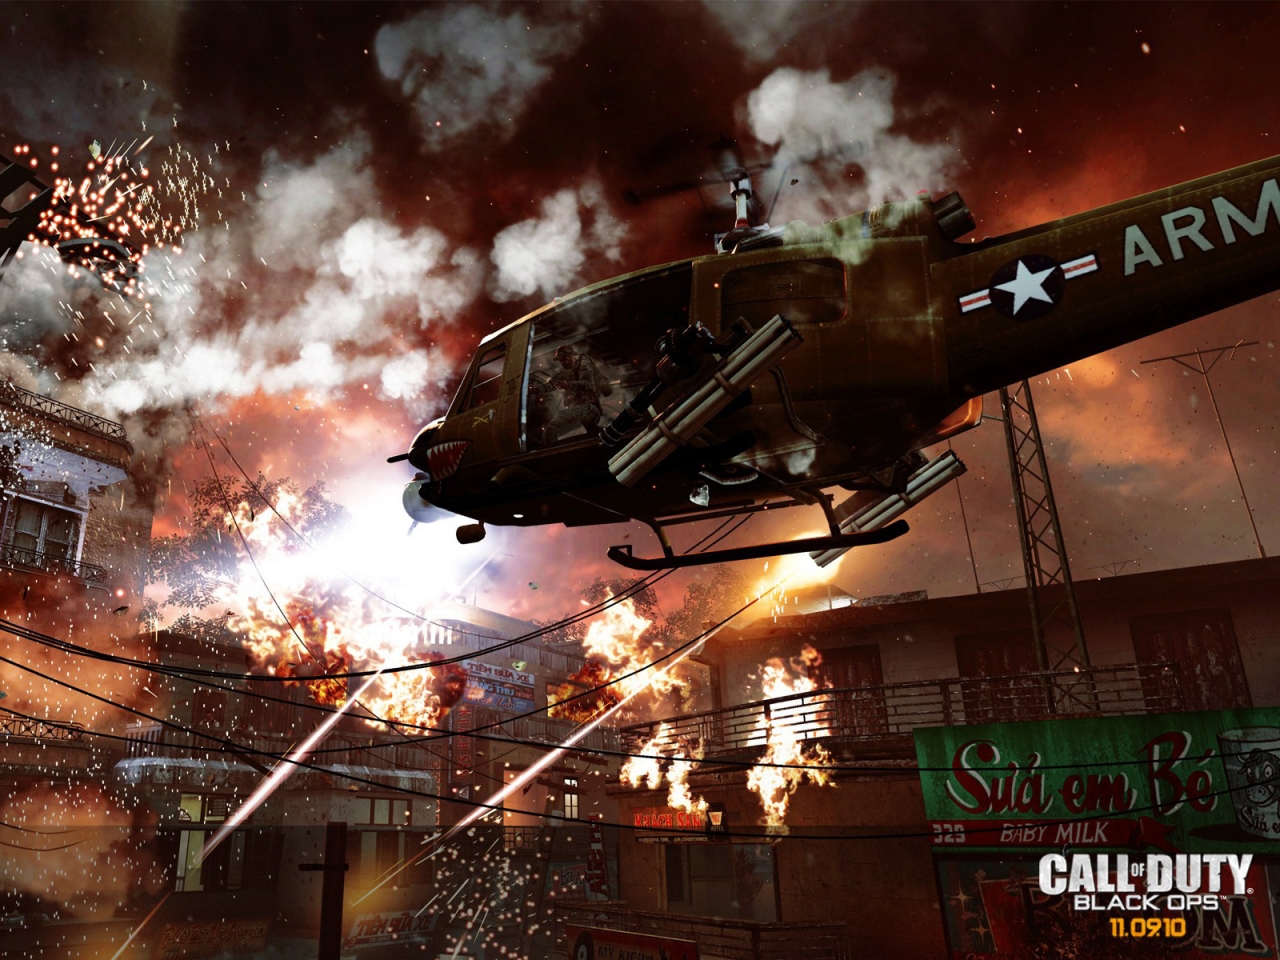 Call of Duty Black Ops Air Support for 1280 x 960 resolution